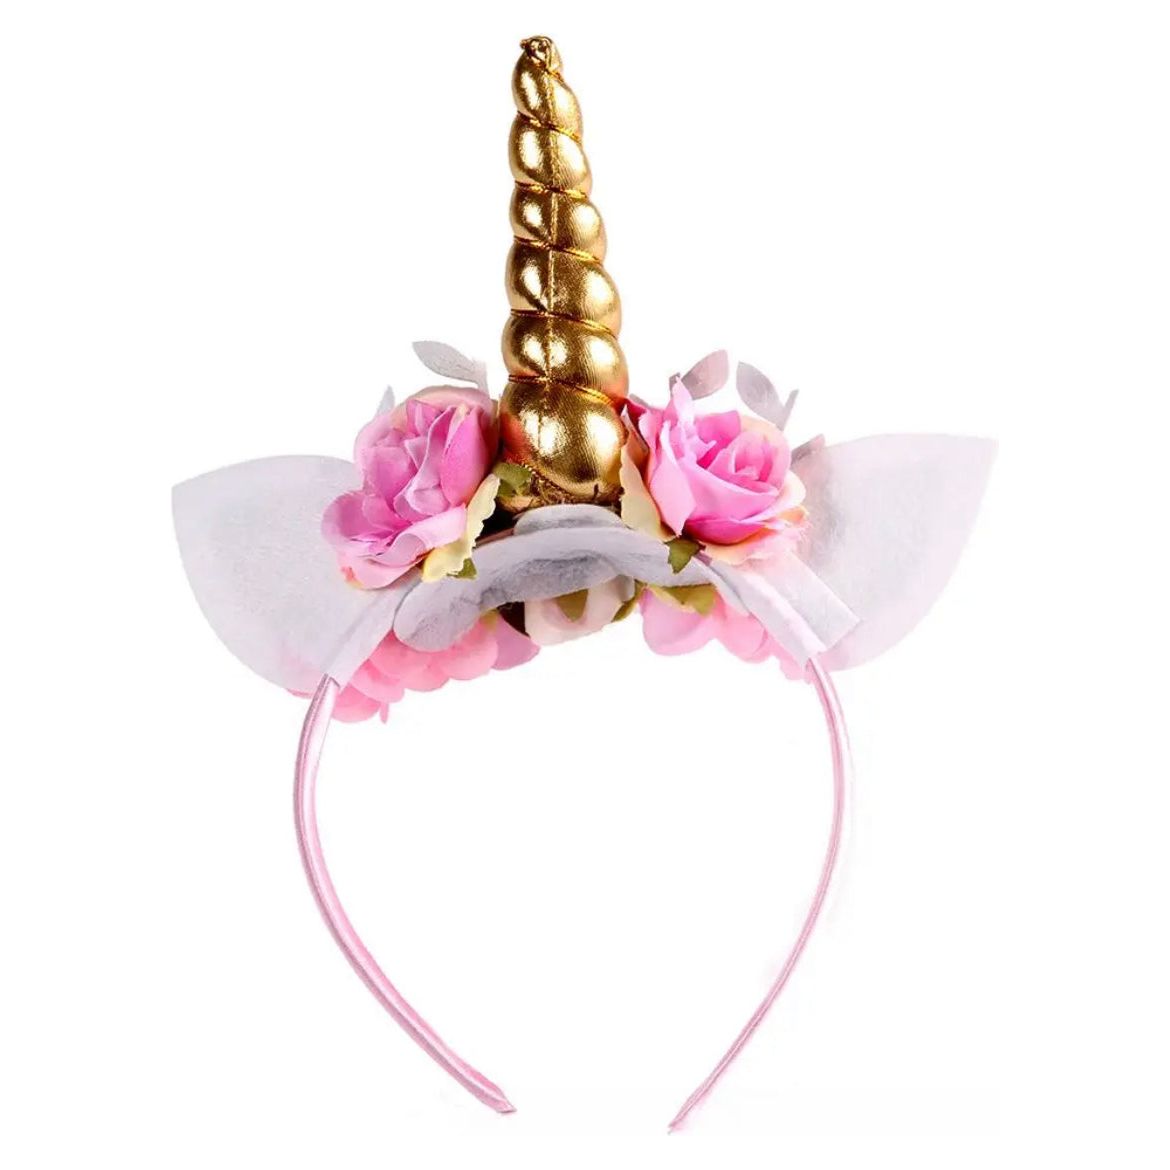 Pibi Unicorn Horn  with Flowers Hairbands Hfl1101-14 Assorted Age- 2 Years & Above